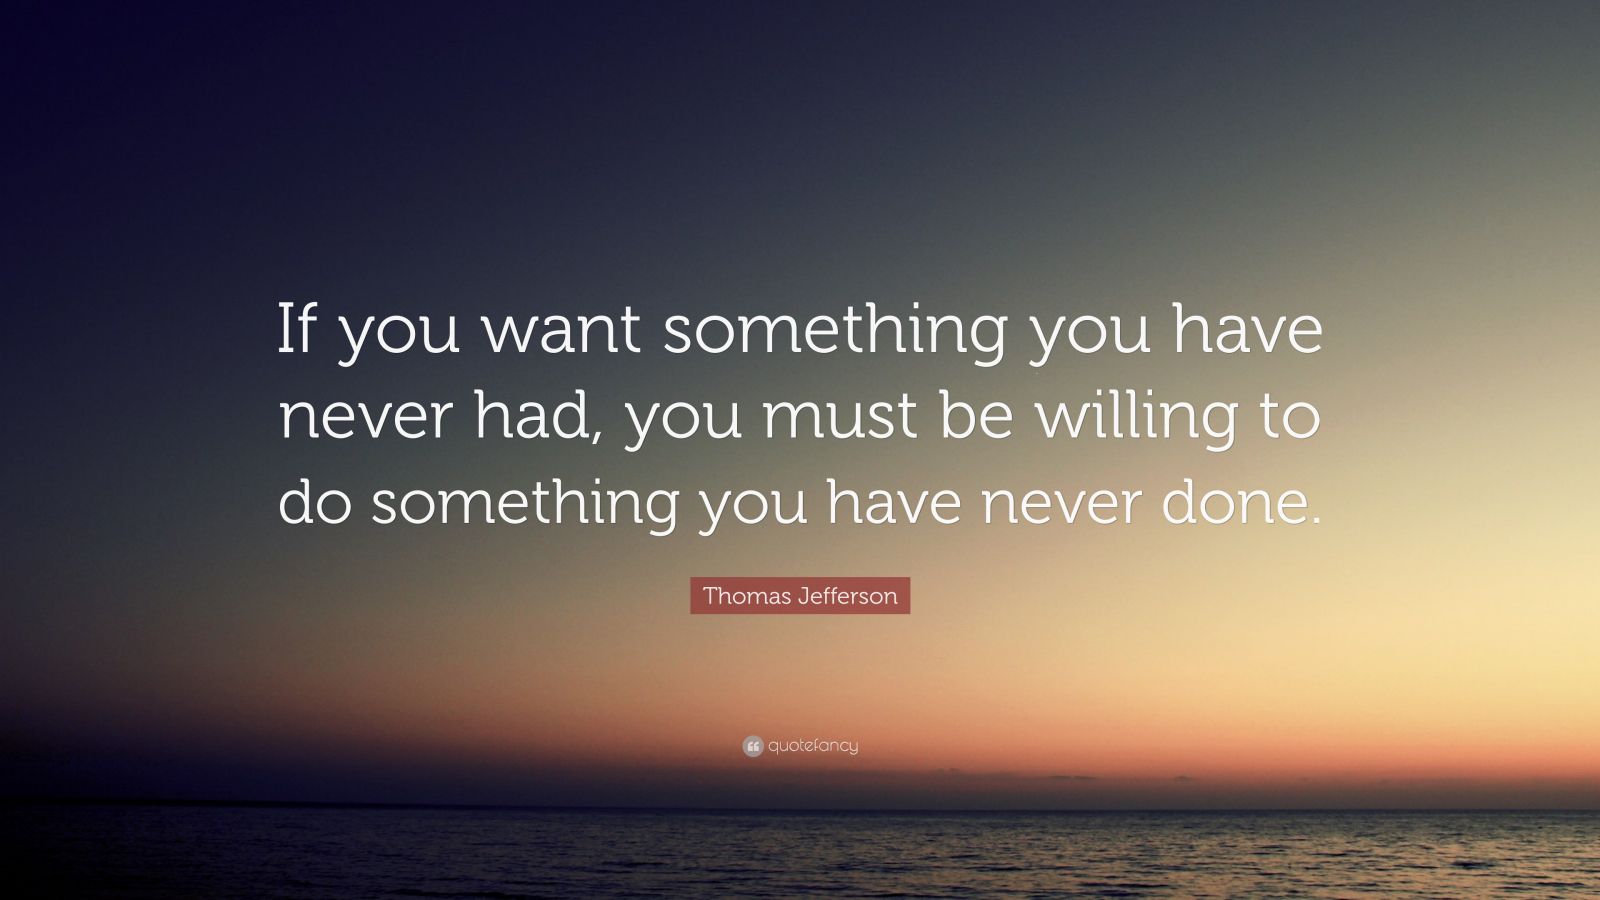 Thomas Jefferson Quote: “If you want something you have never had, you